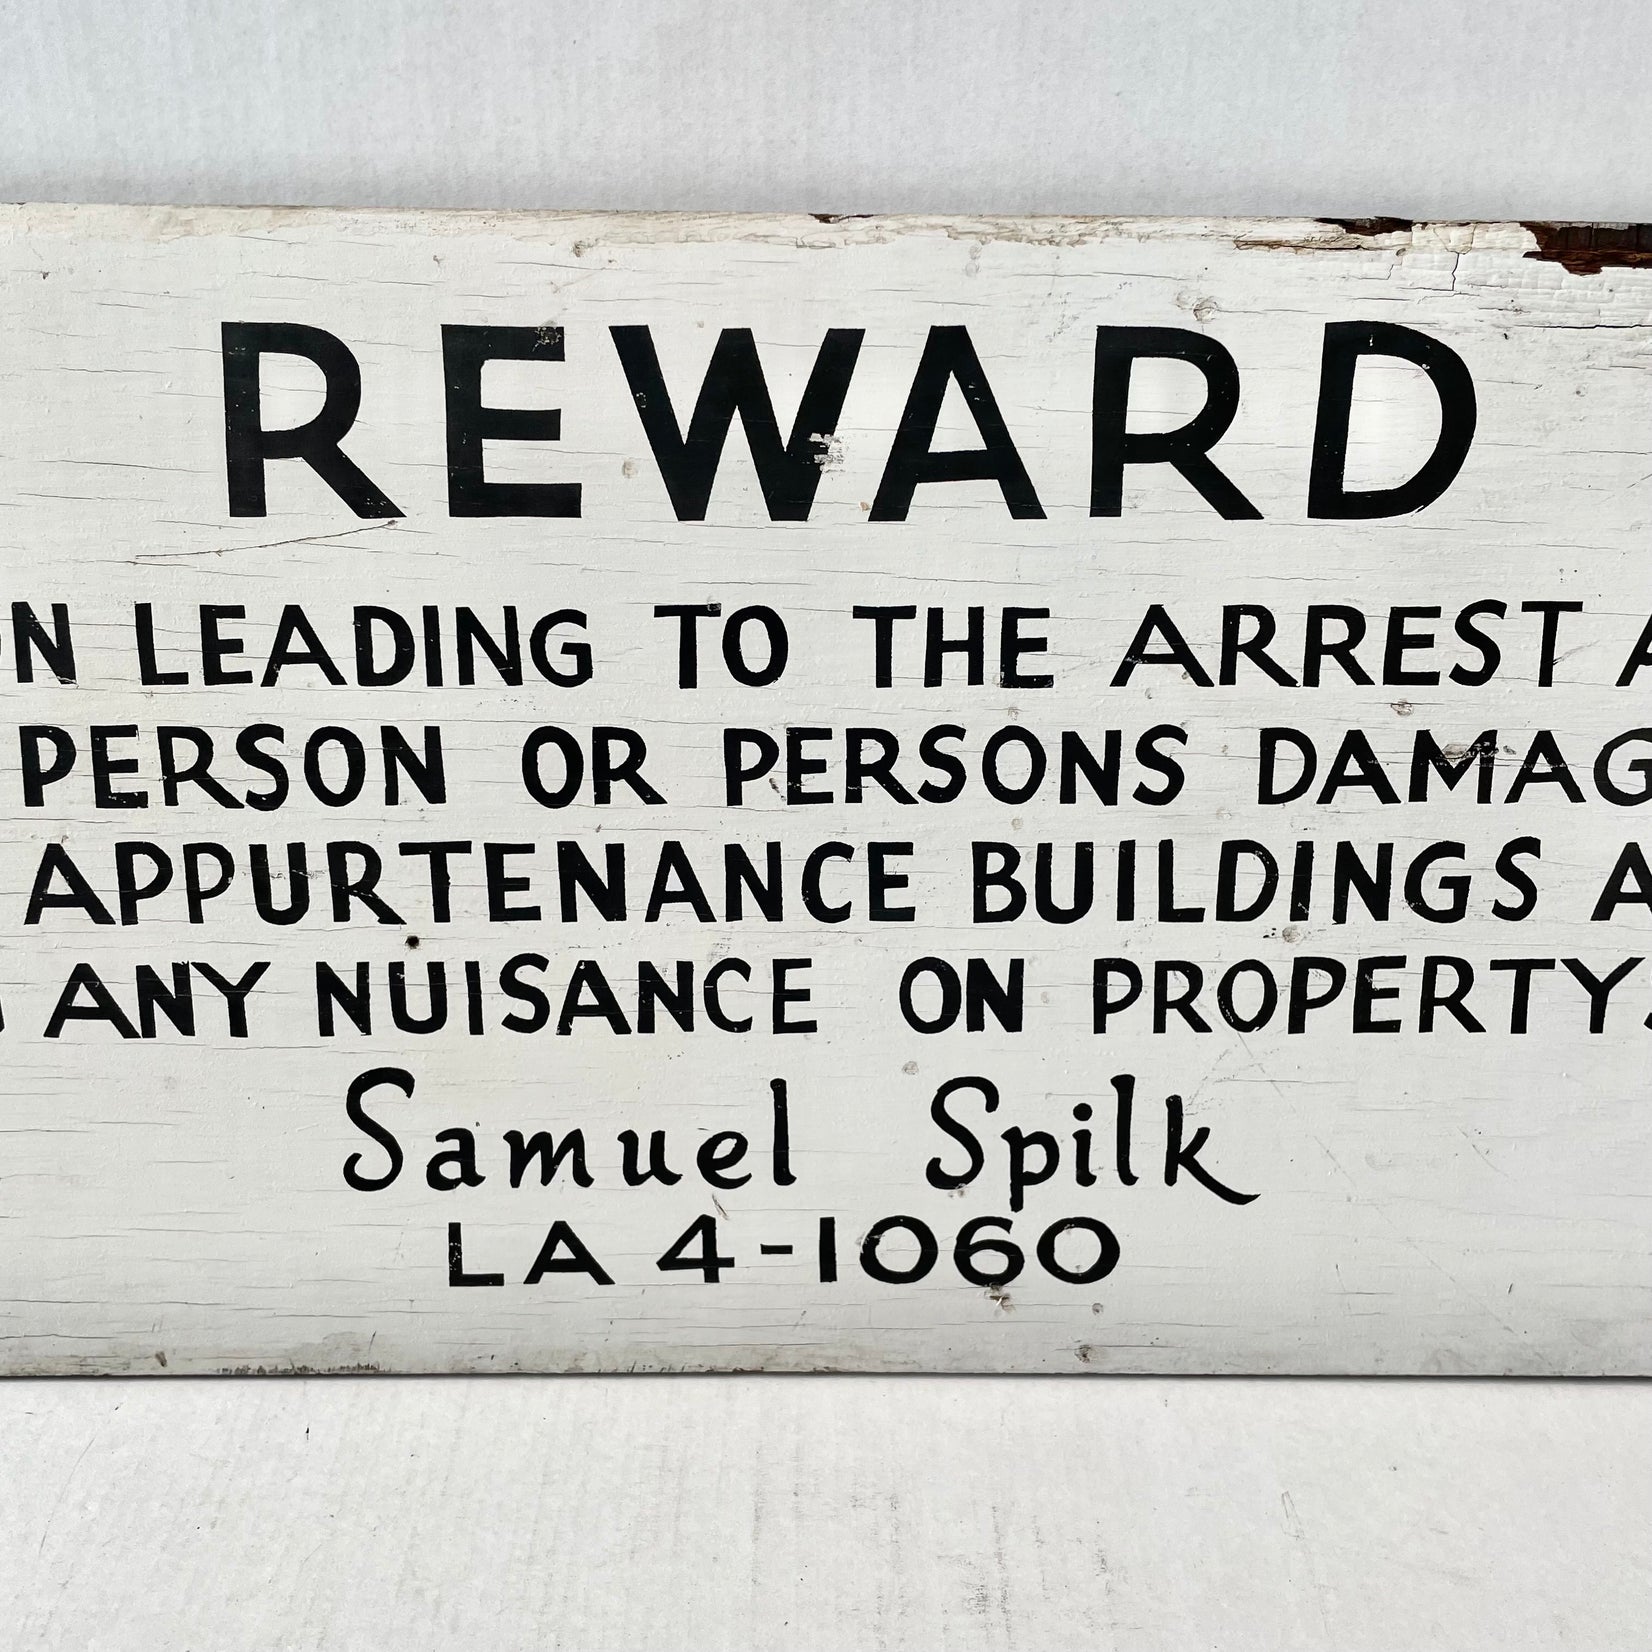 Hand Painted $100 REWARD Wooden Sign, 1940s Los Angeles